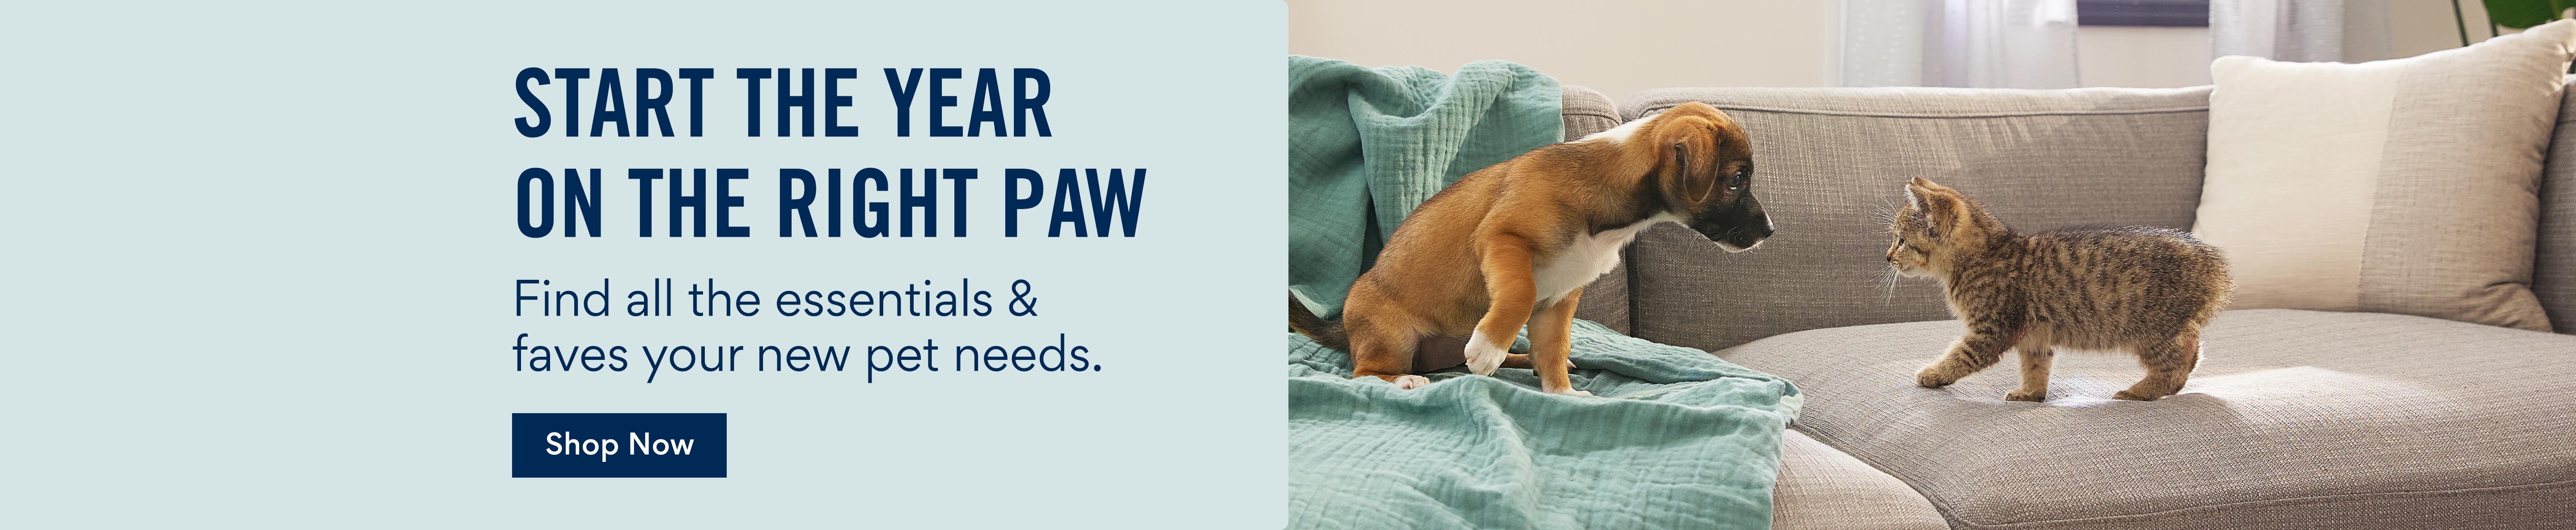 Start the year on the right paw find all the essentials & favs your new pet needs.